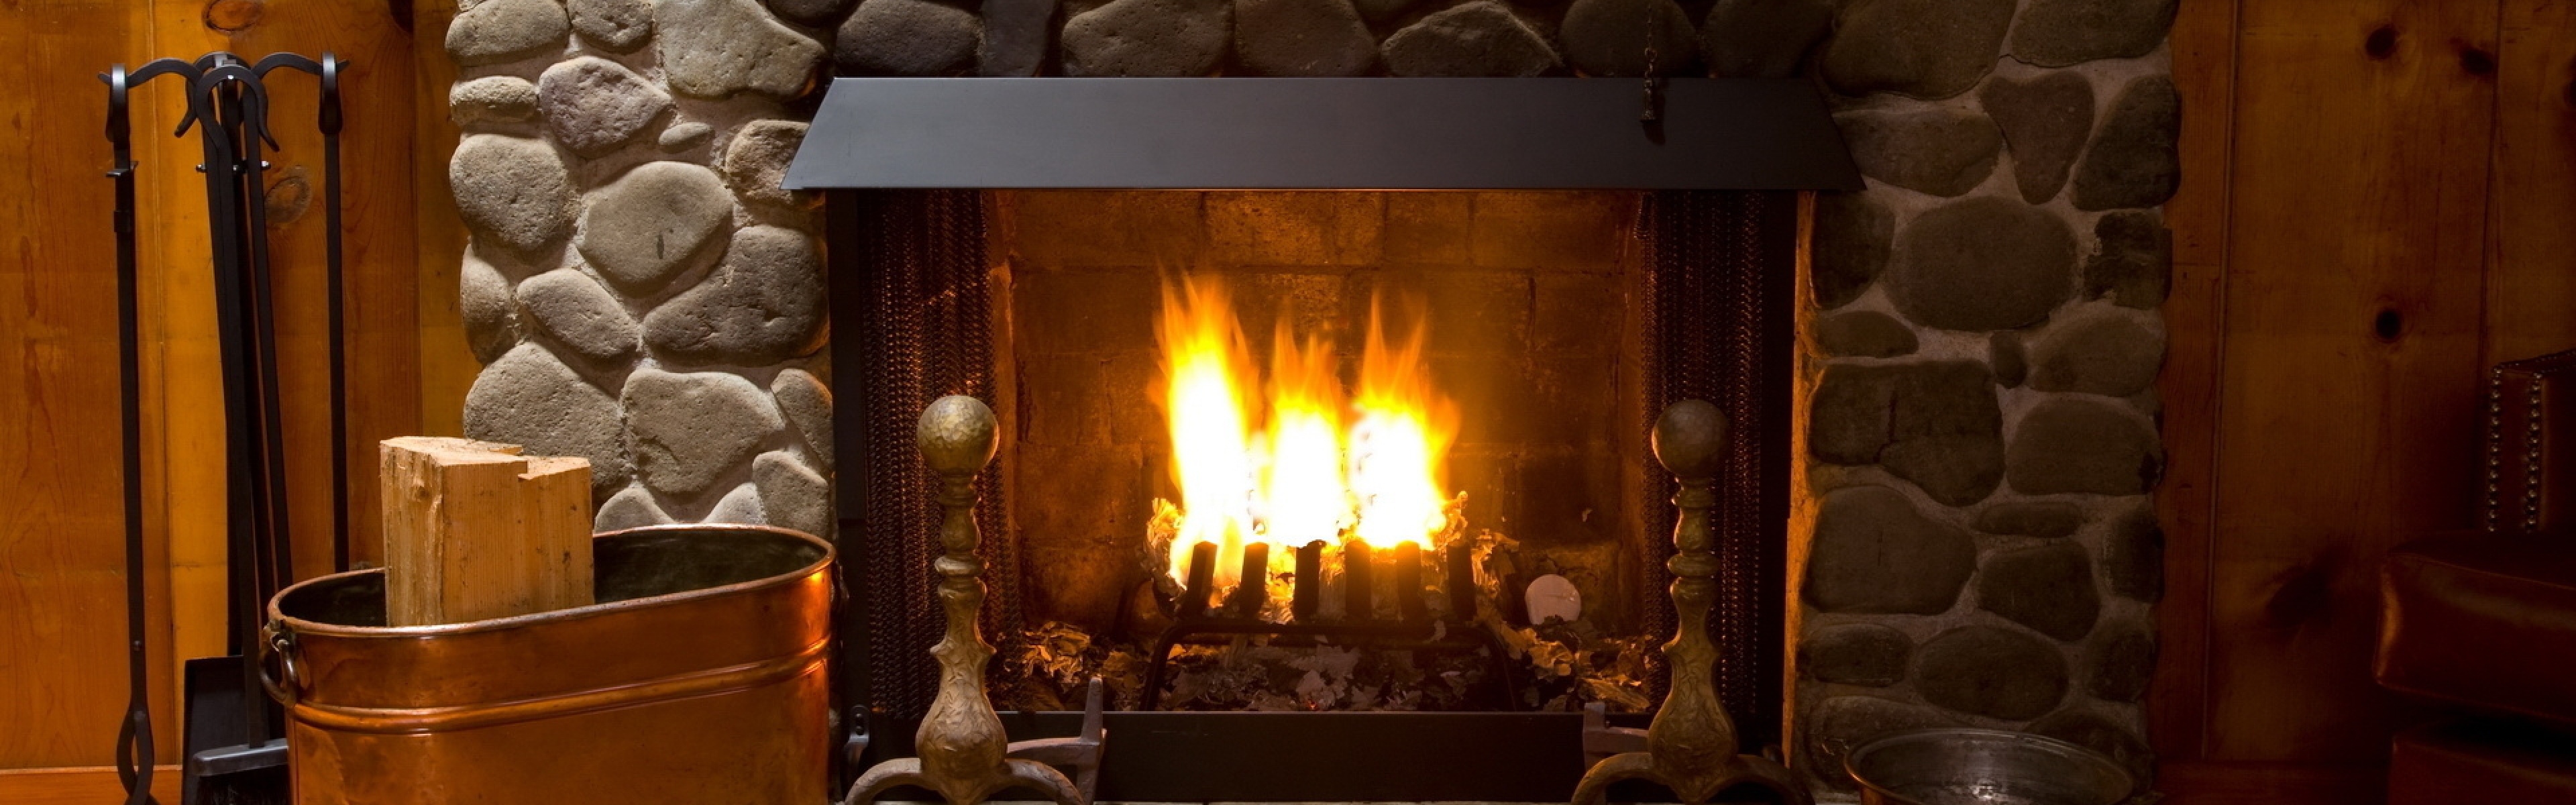 Fireplace Cozy Interior Lamp Wallpaper Background Dual Wide